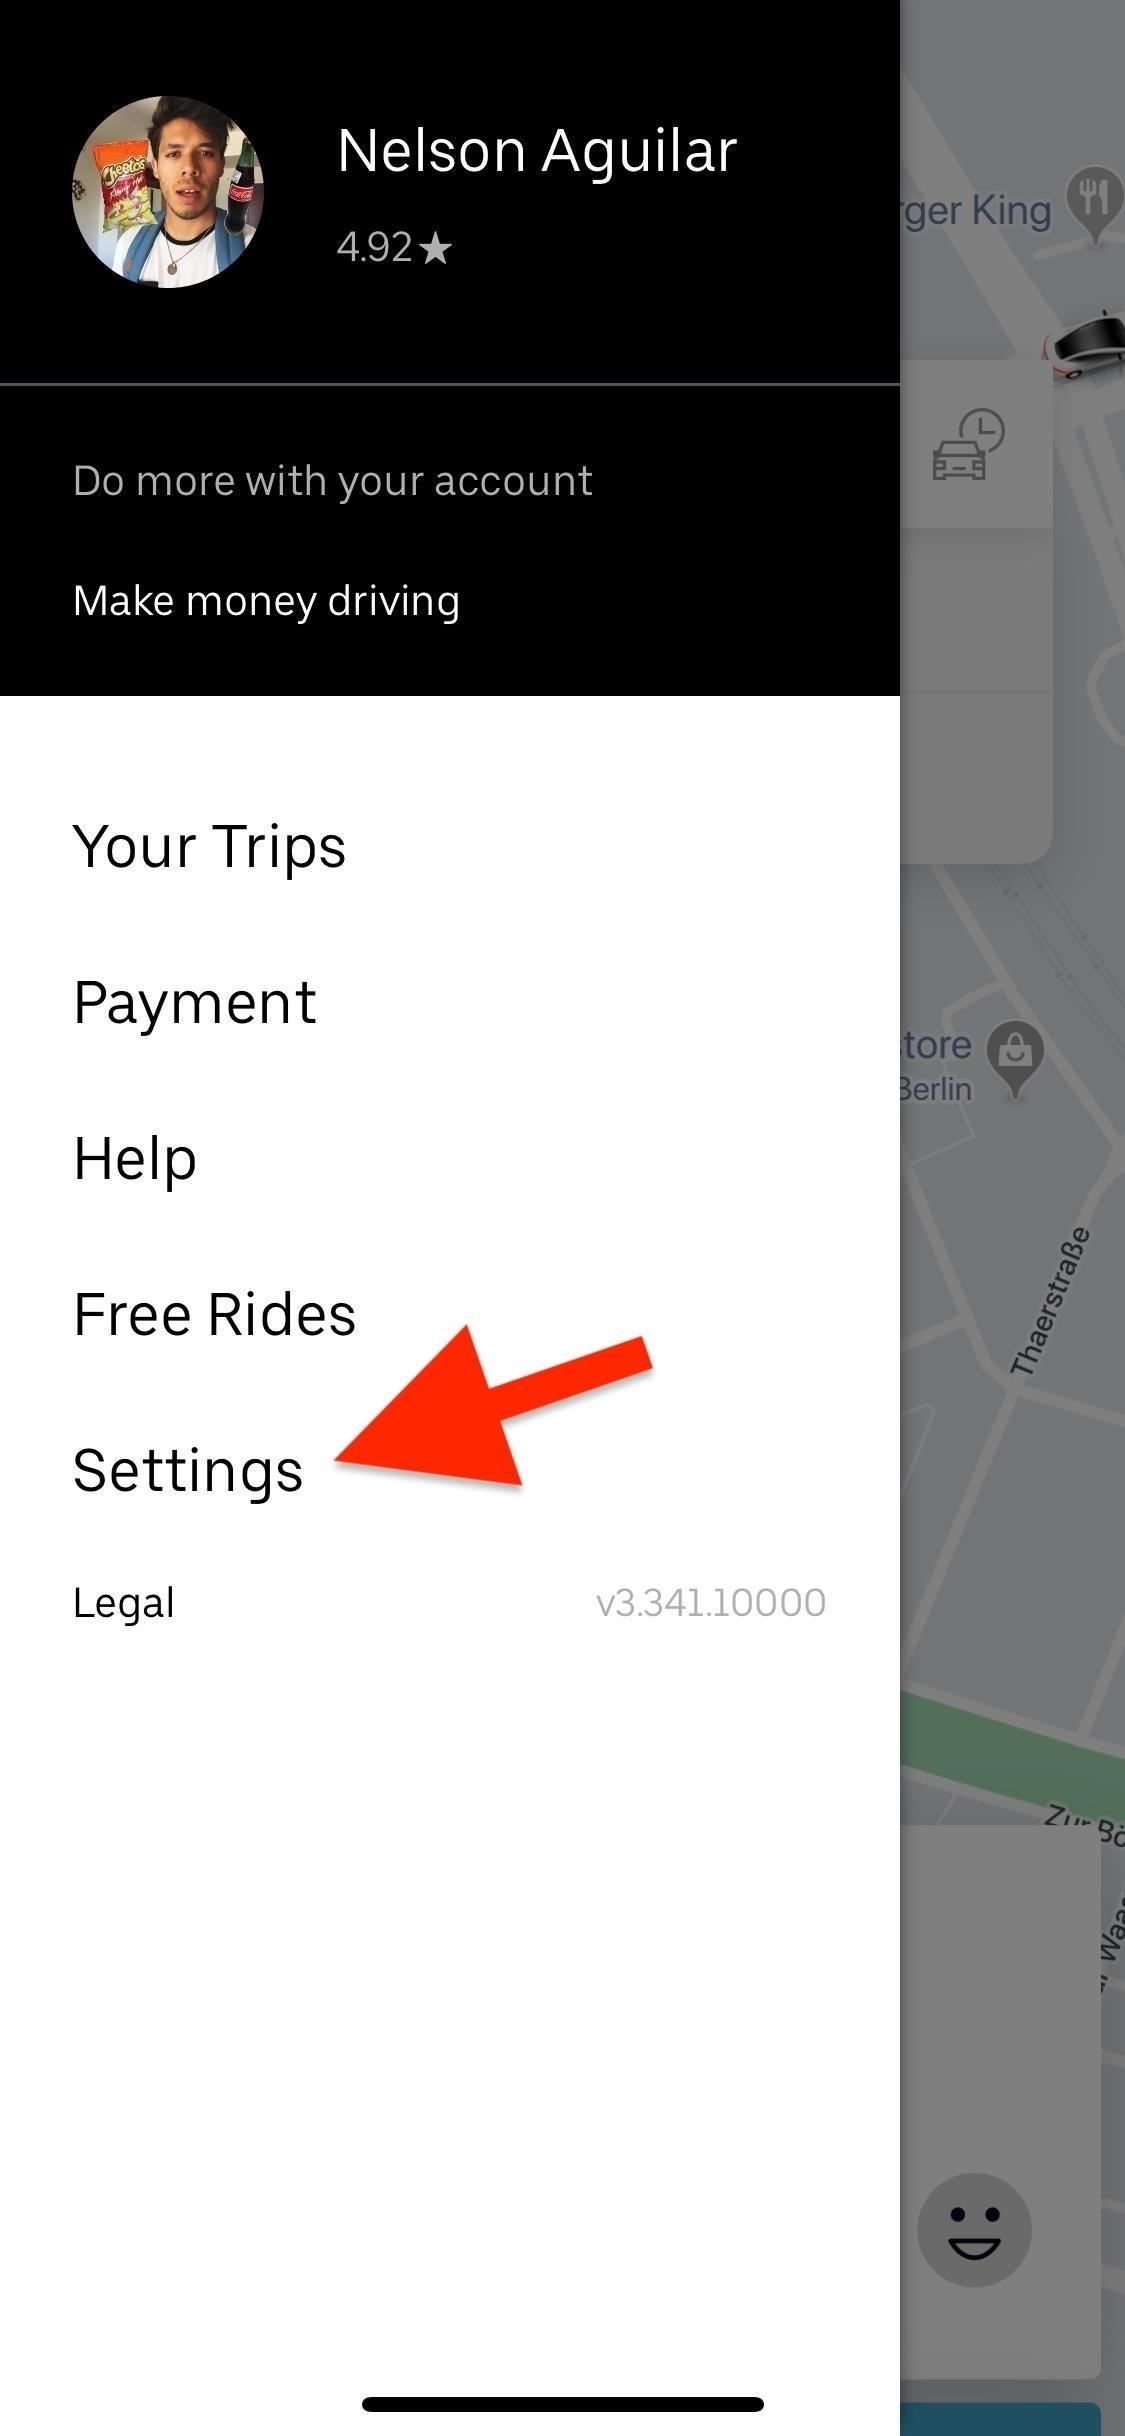 How to Send Your Uber Trip Status to Trusted Contacts if You're Ever in a Sketchy Situation